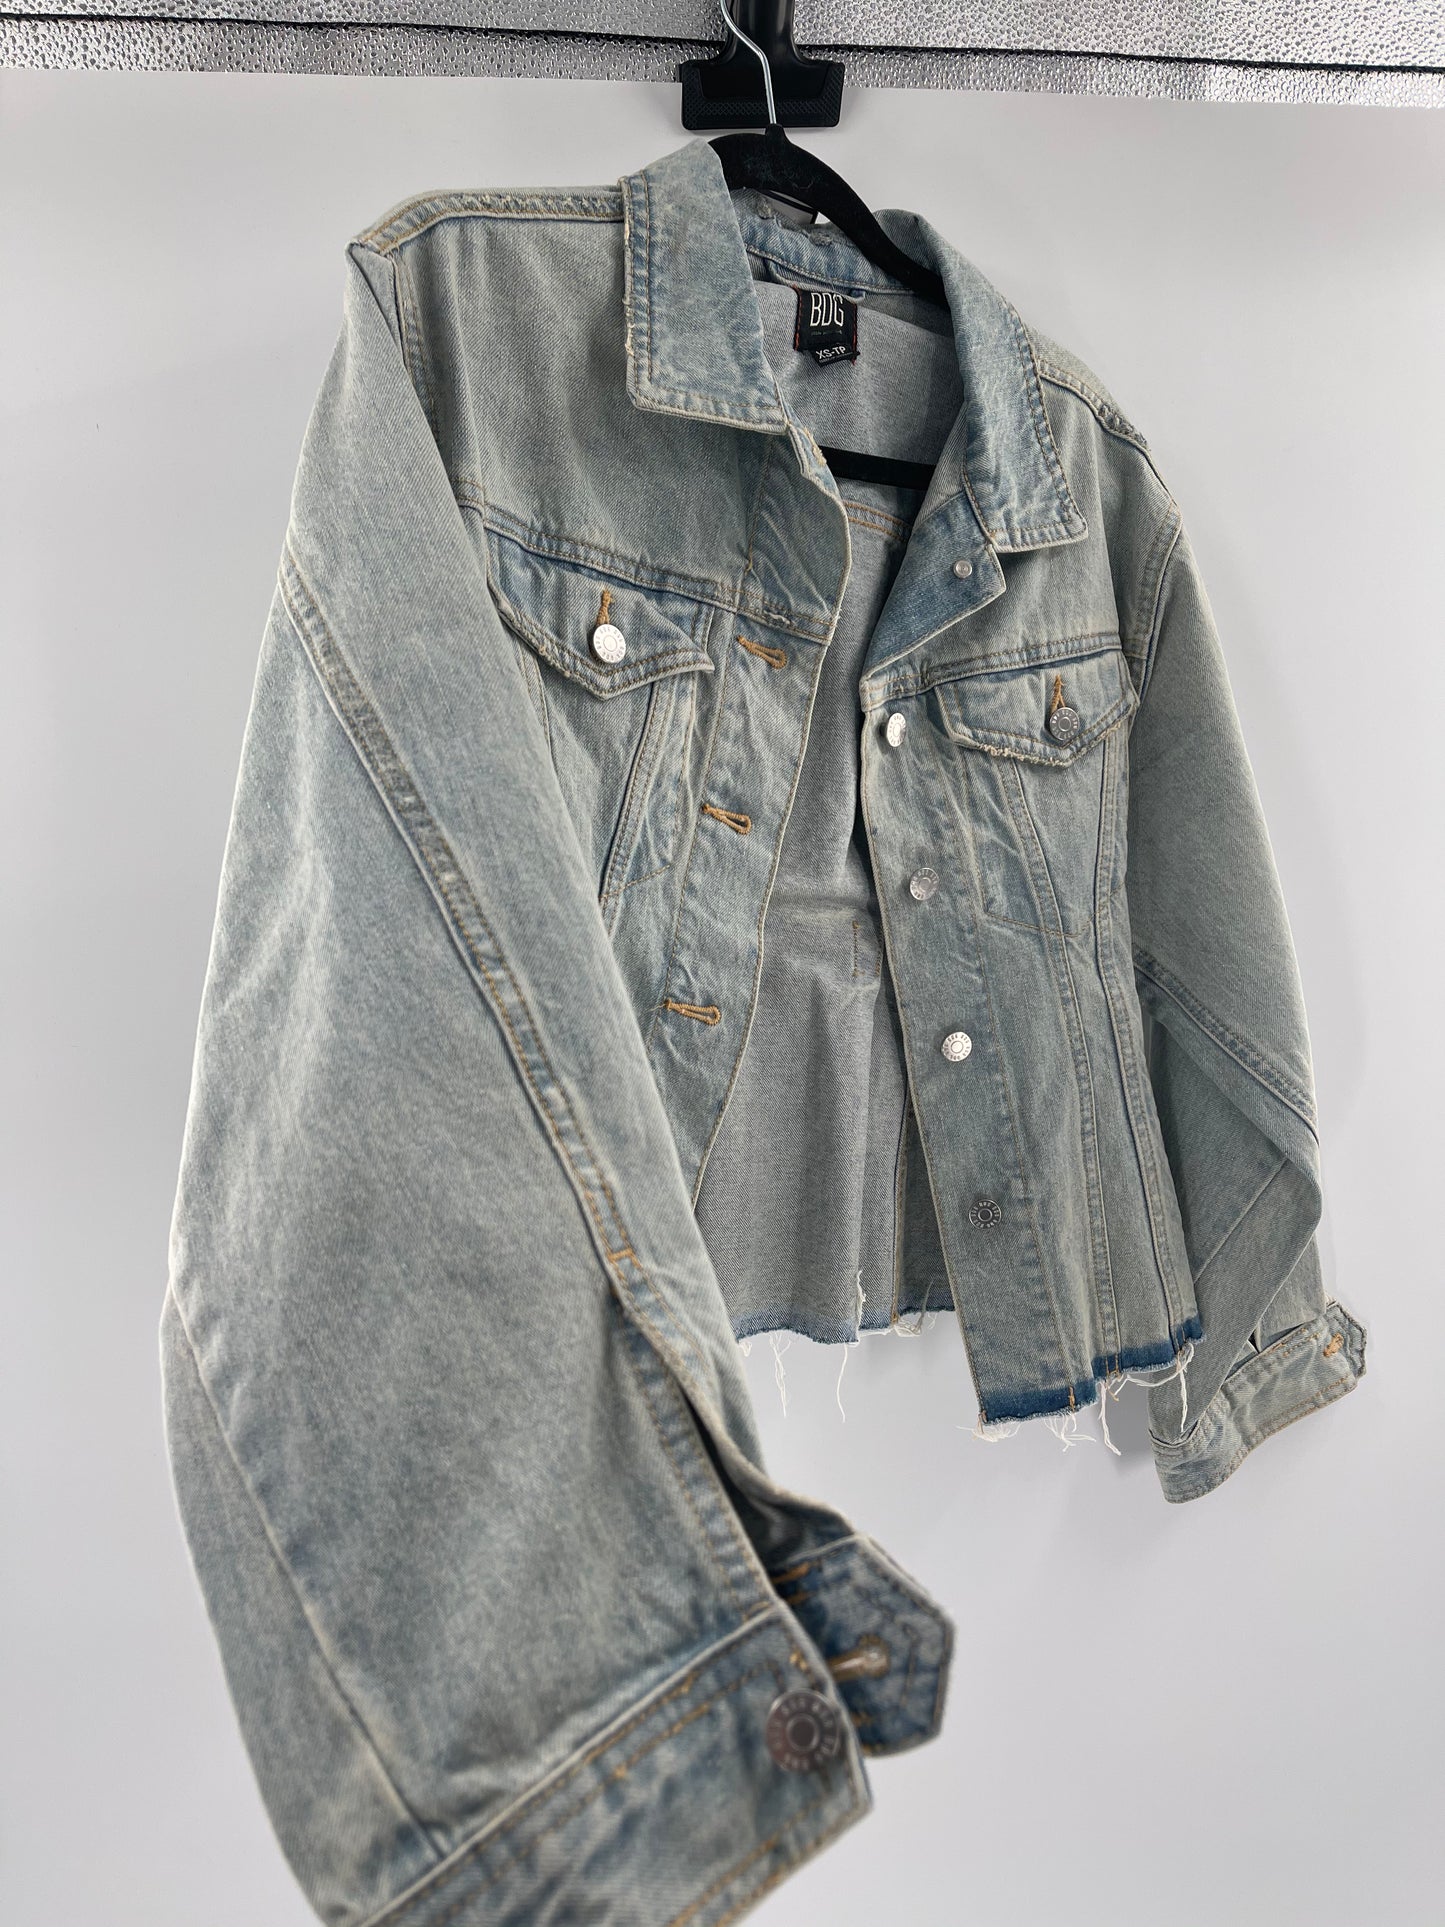 BDG - Urban Outfitters- Light Wash Denim Jacket (Size XS)